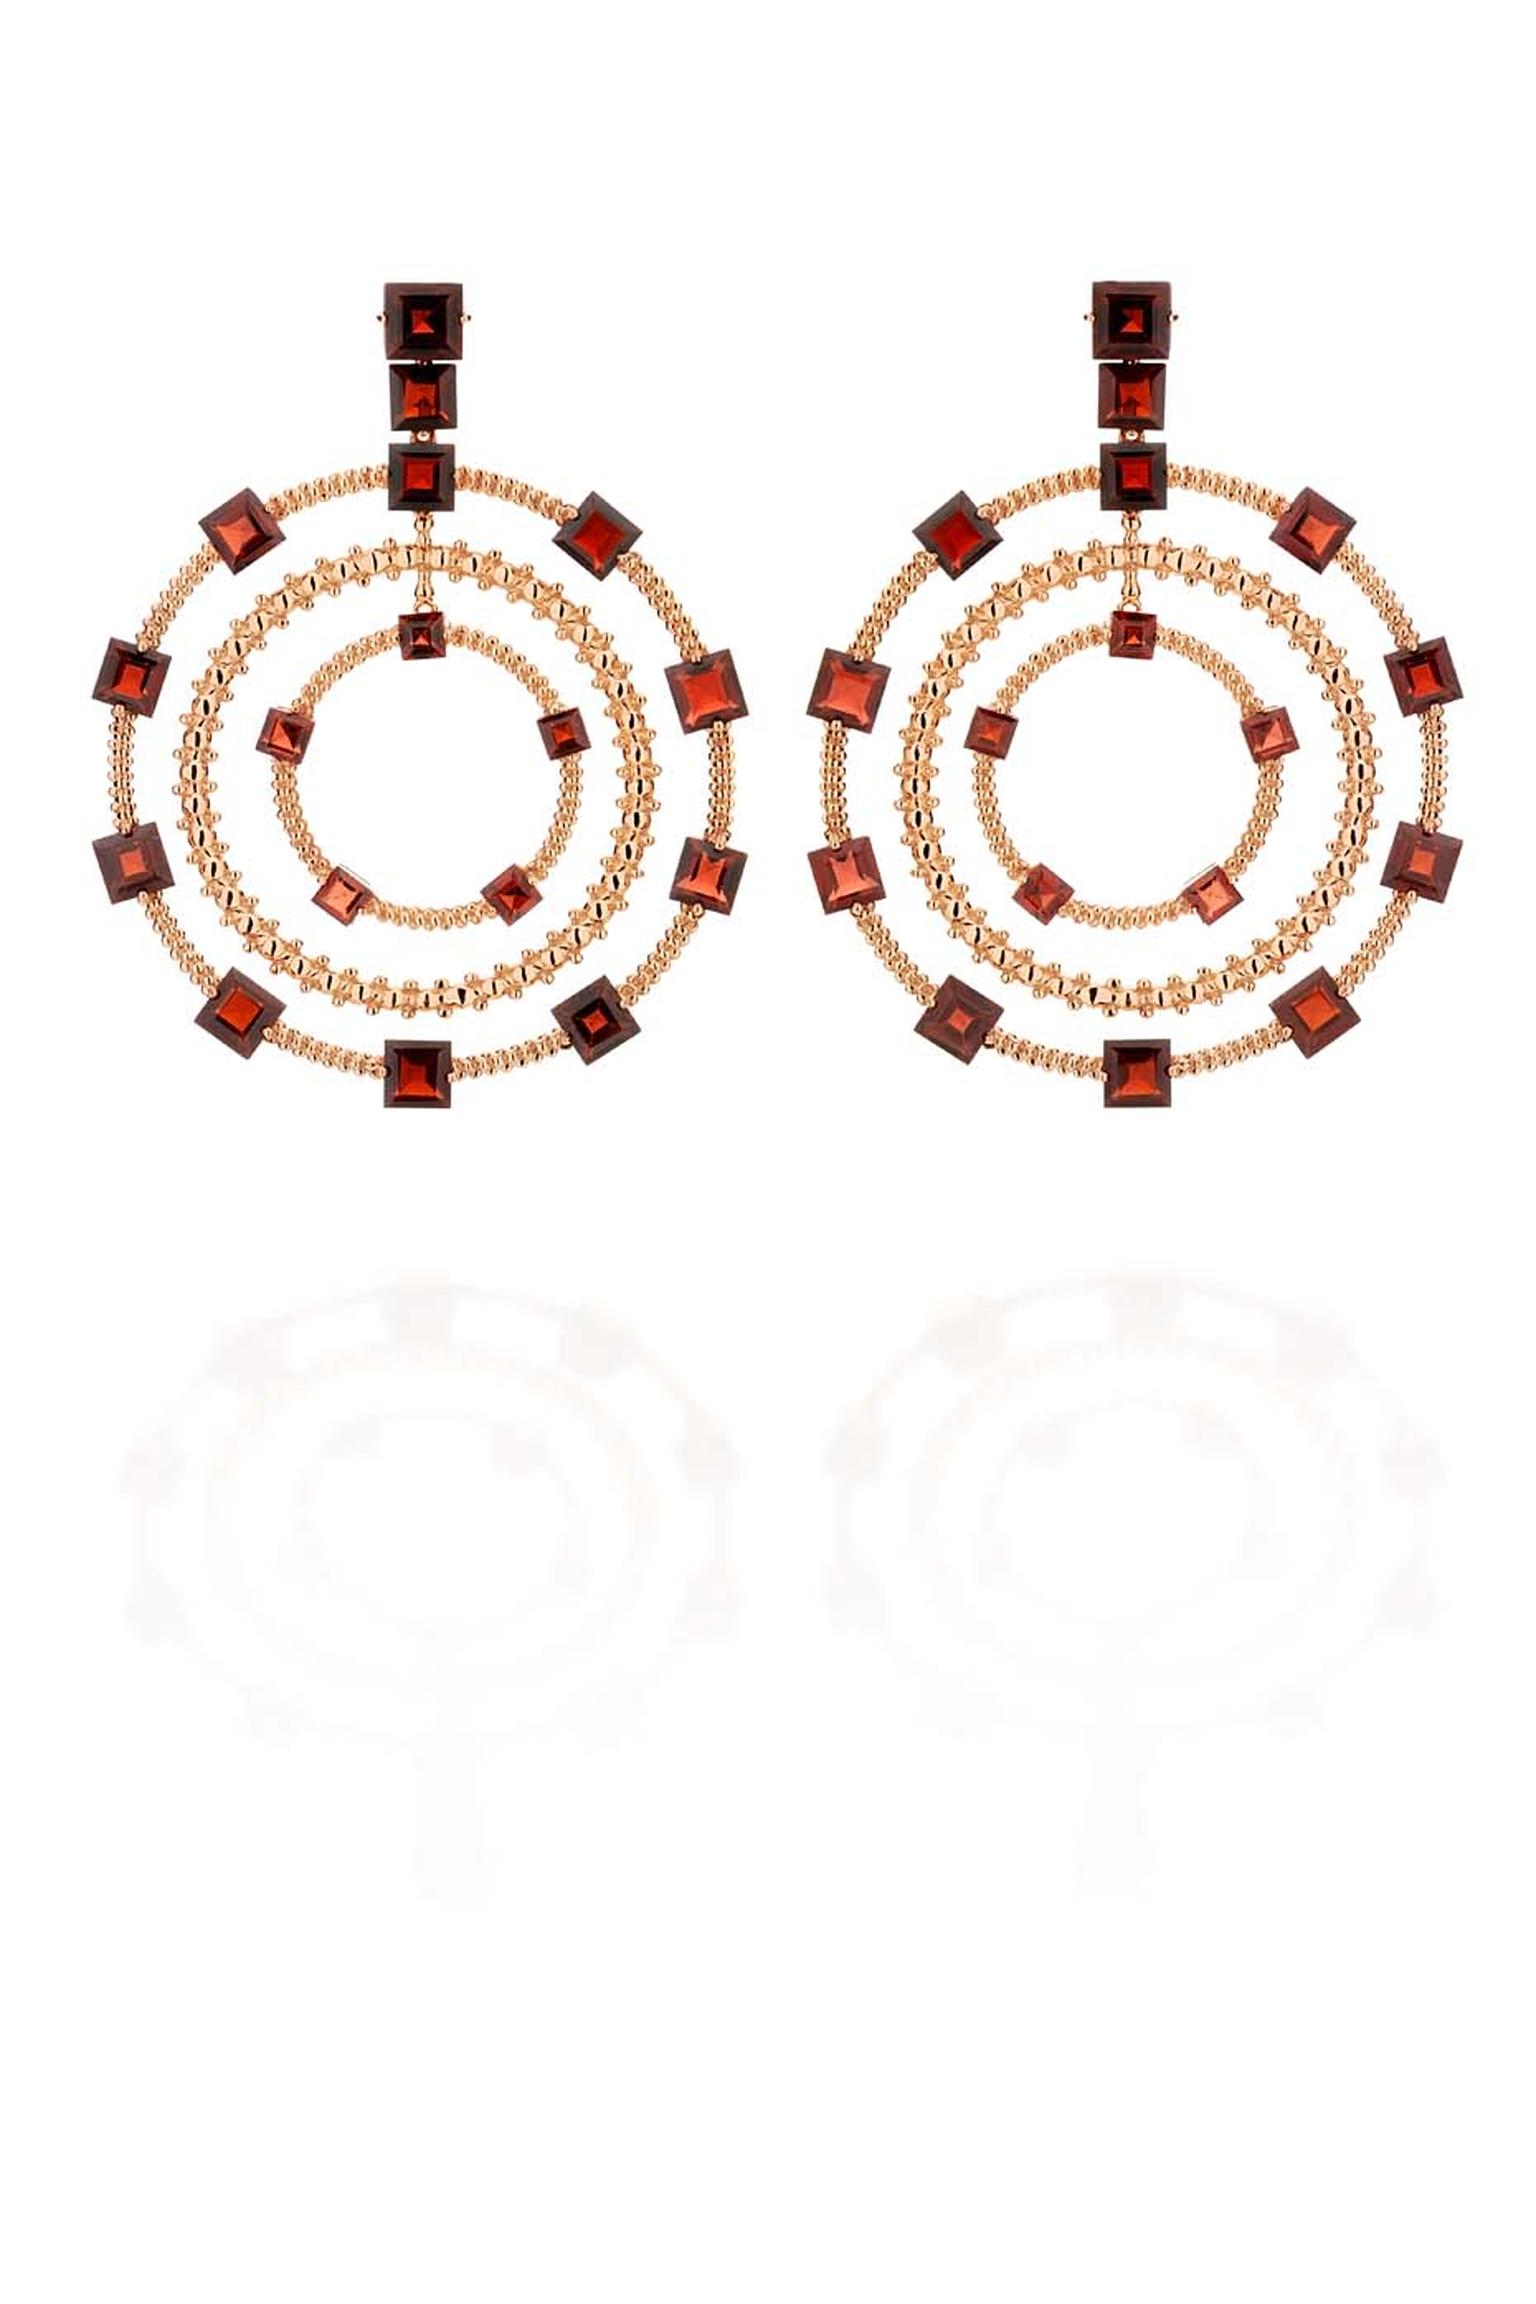 Carla Amorim hoop earrings in rose gold with square-cut red garnets, from the Sao Paulo collection.